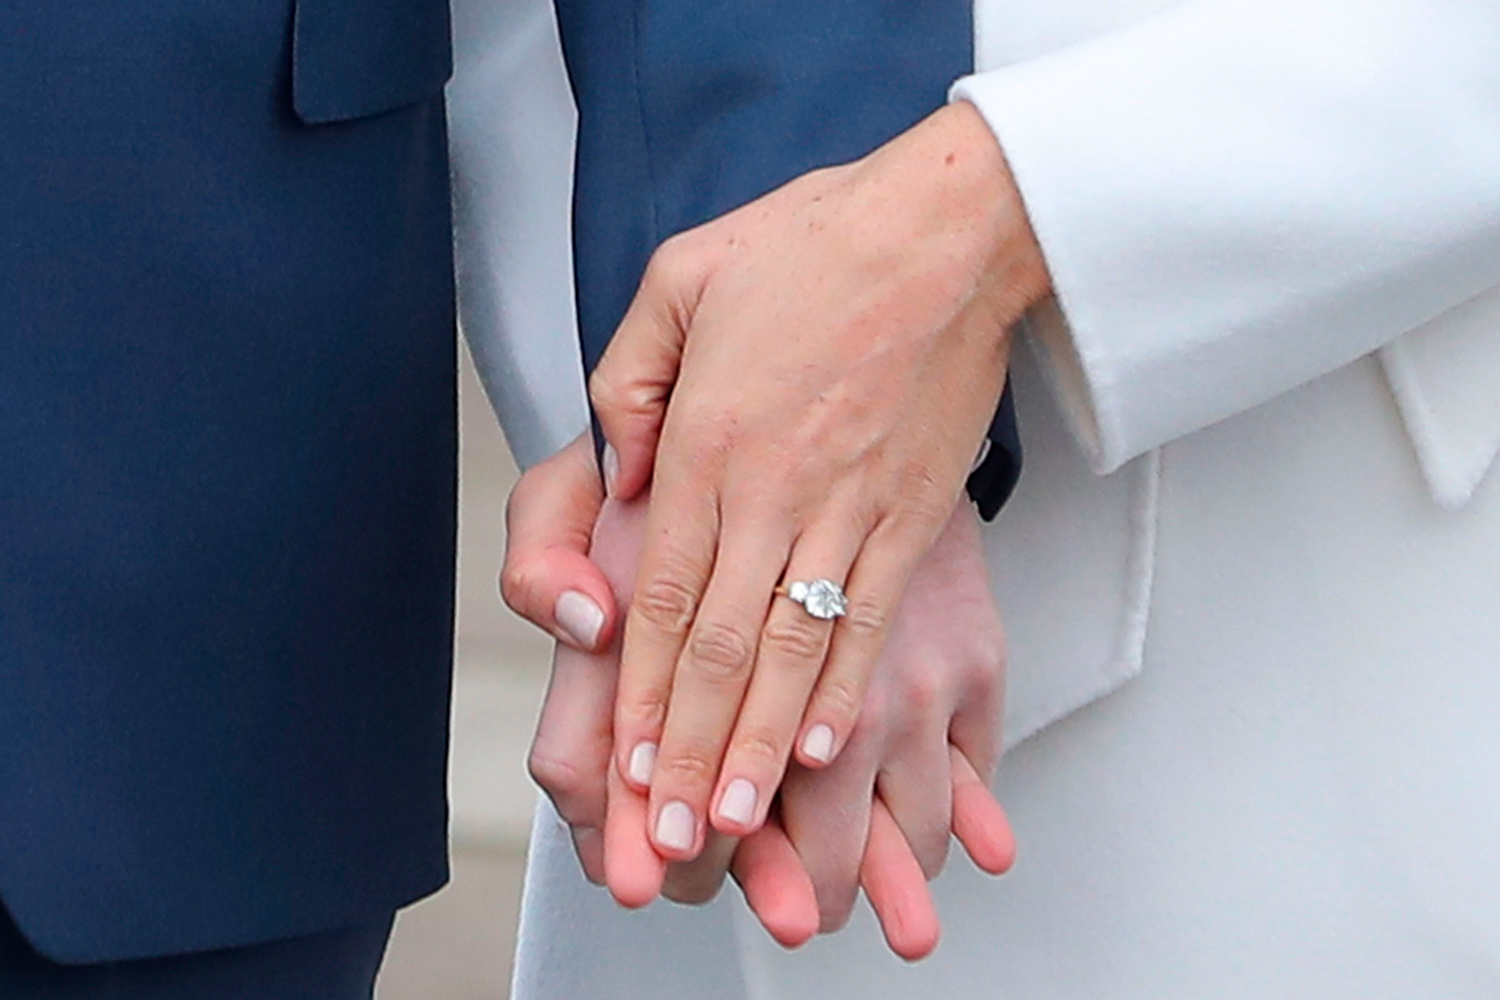 Prince Harry stands with his fiancée US actress Meghan Markle as she shows off her engagement ring